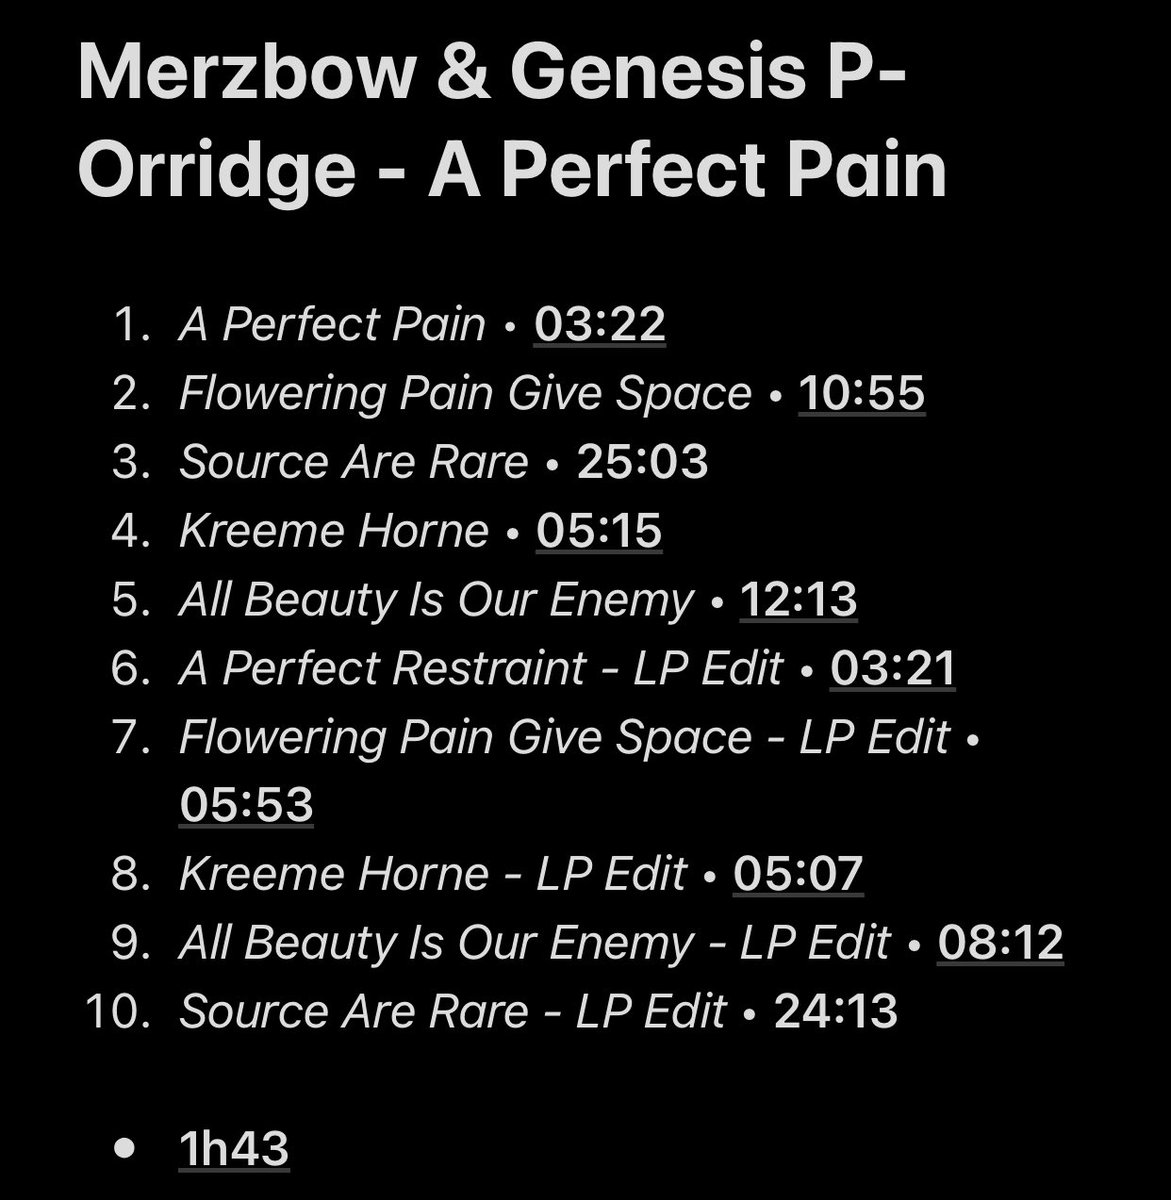 98/109: A Perfect Pain (with Genesis P-Orridge)A very long and unsettling album with a outstanding vocal performance from Genesis, that is really disturbing and dive us into a unique dark world. It was a really cool experience and I definitely didn’t waste my time.